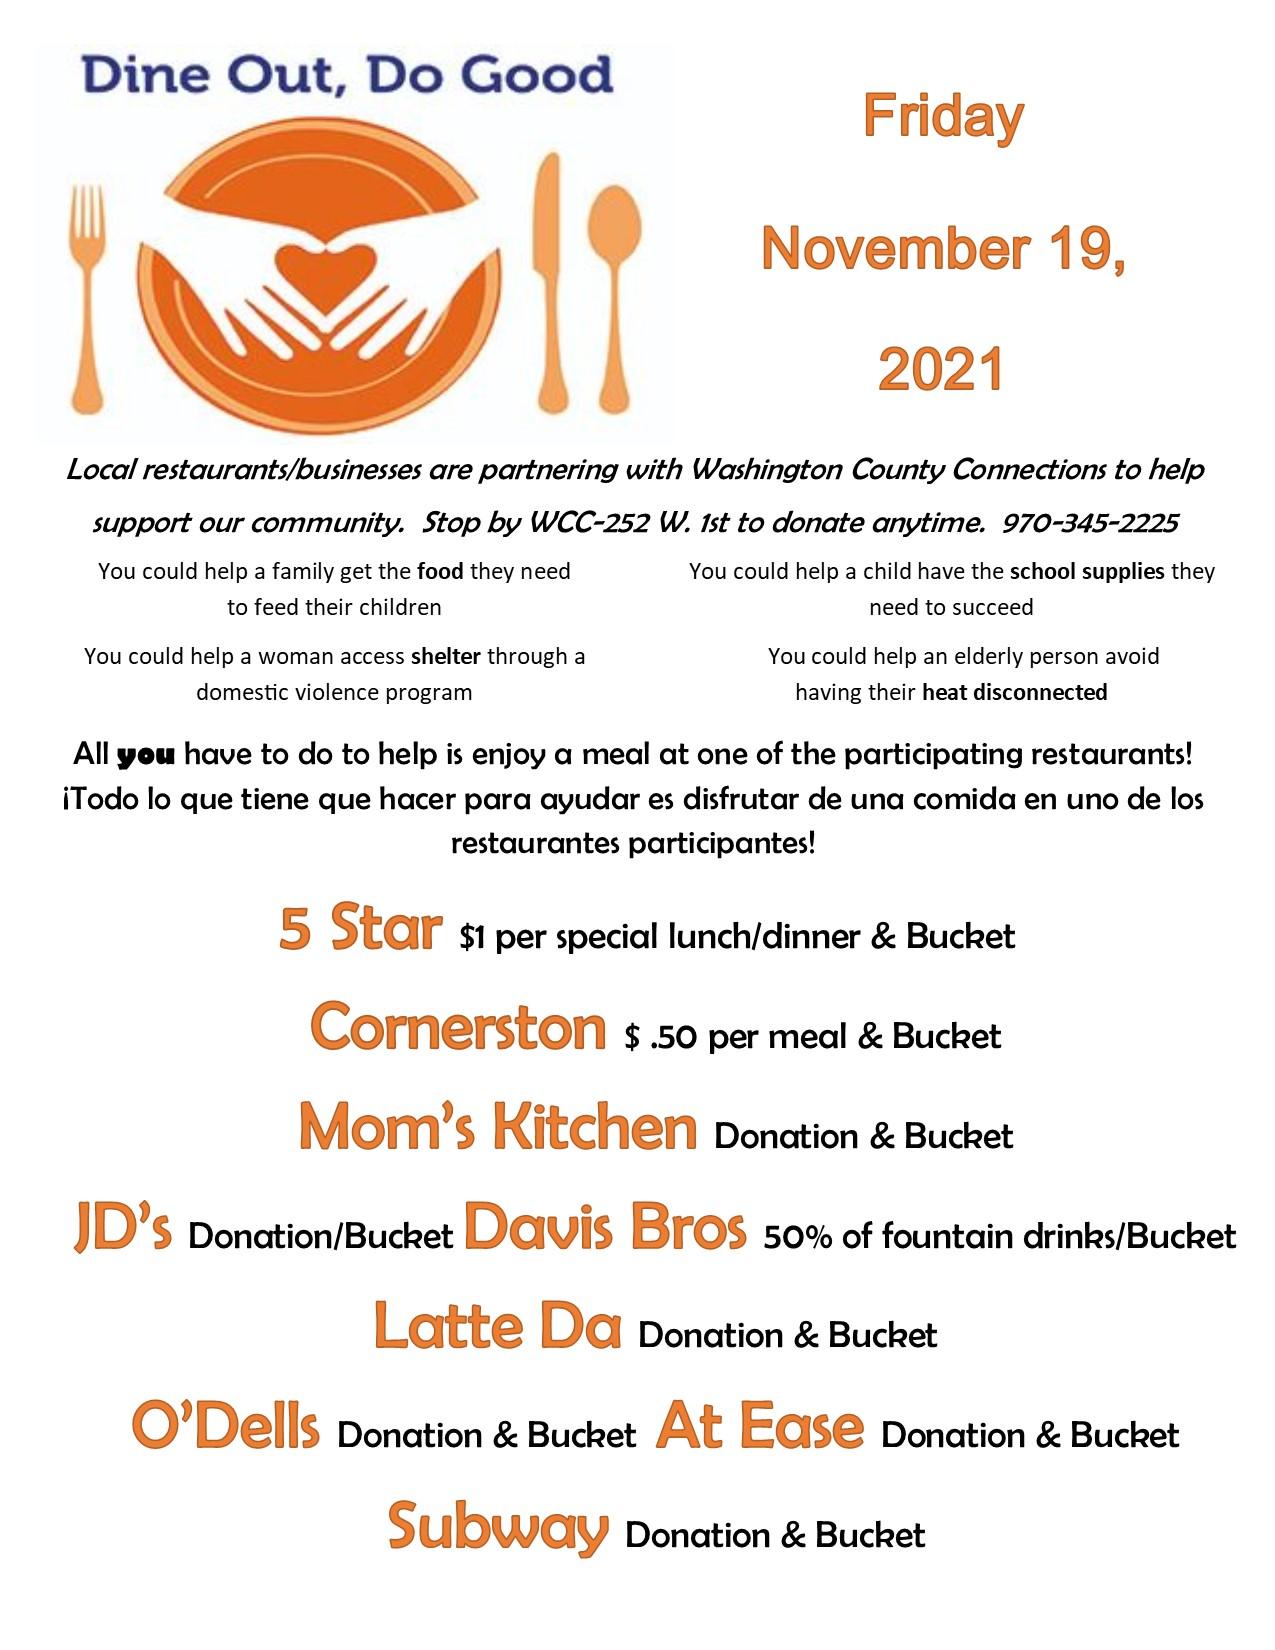 Dine Out, Do Good Flyer 2021